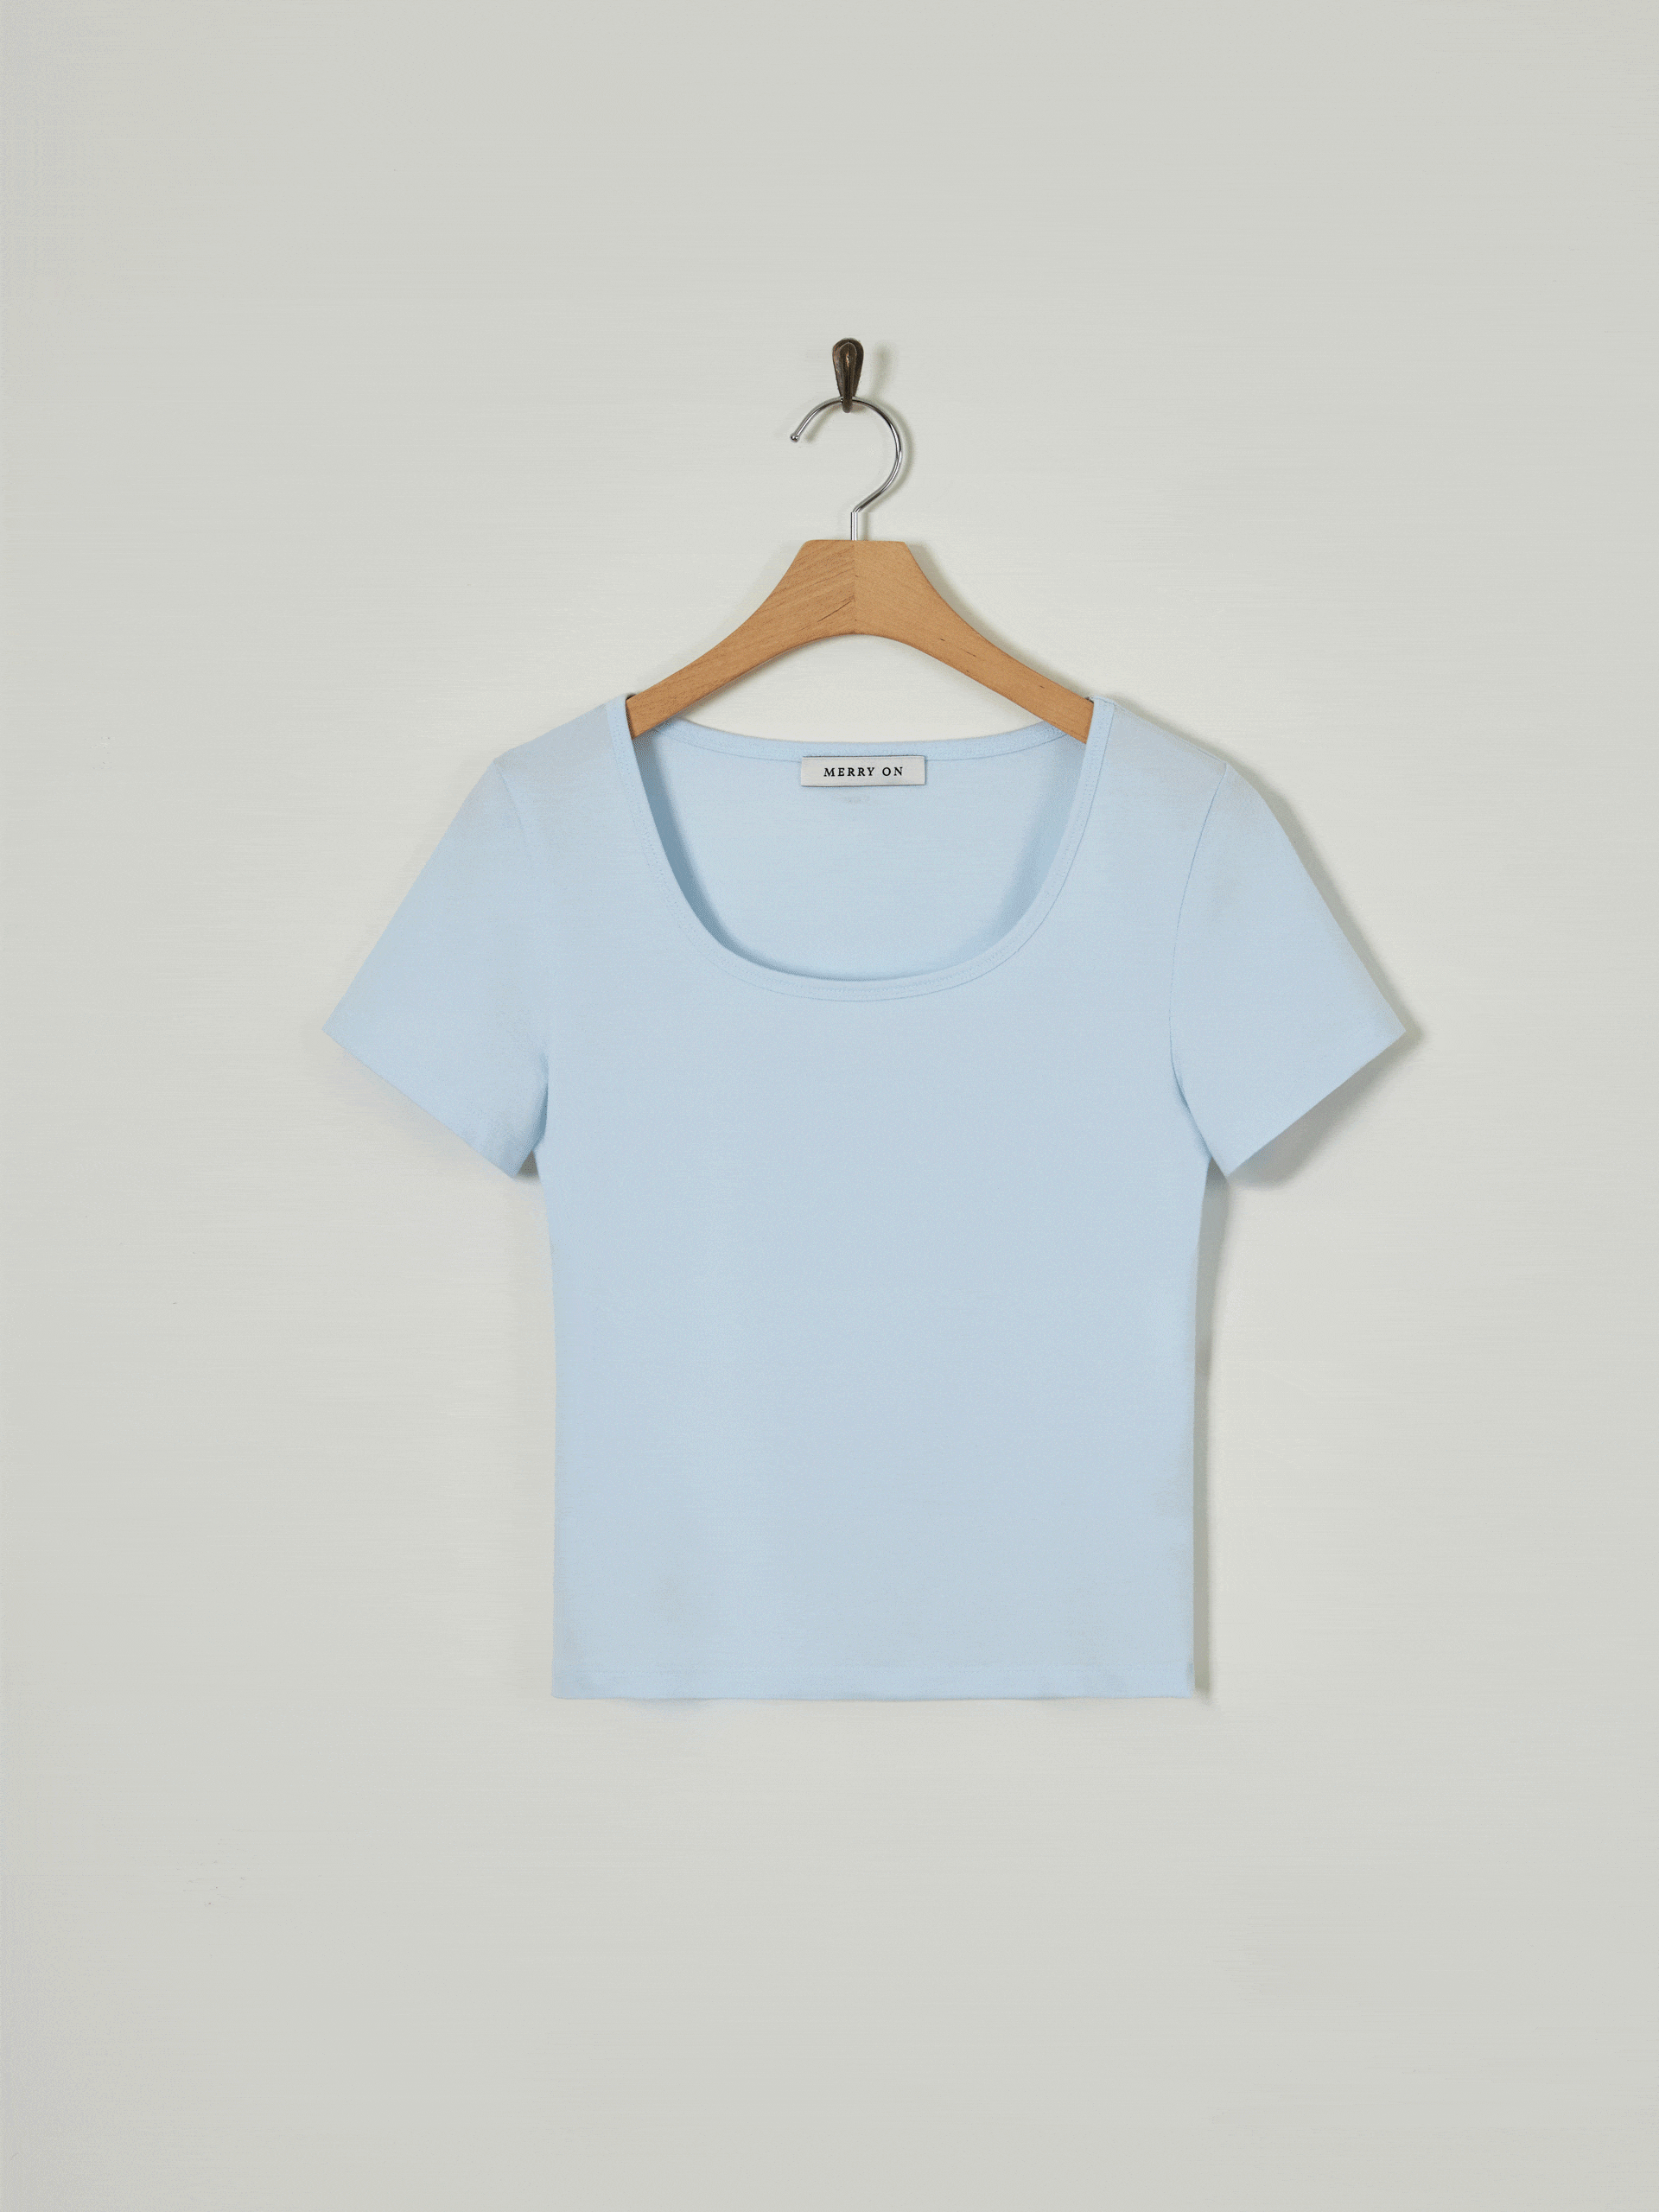 Jane Square Neck T-shirt [Departure today]